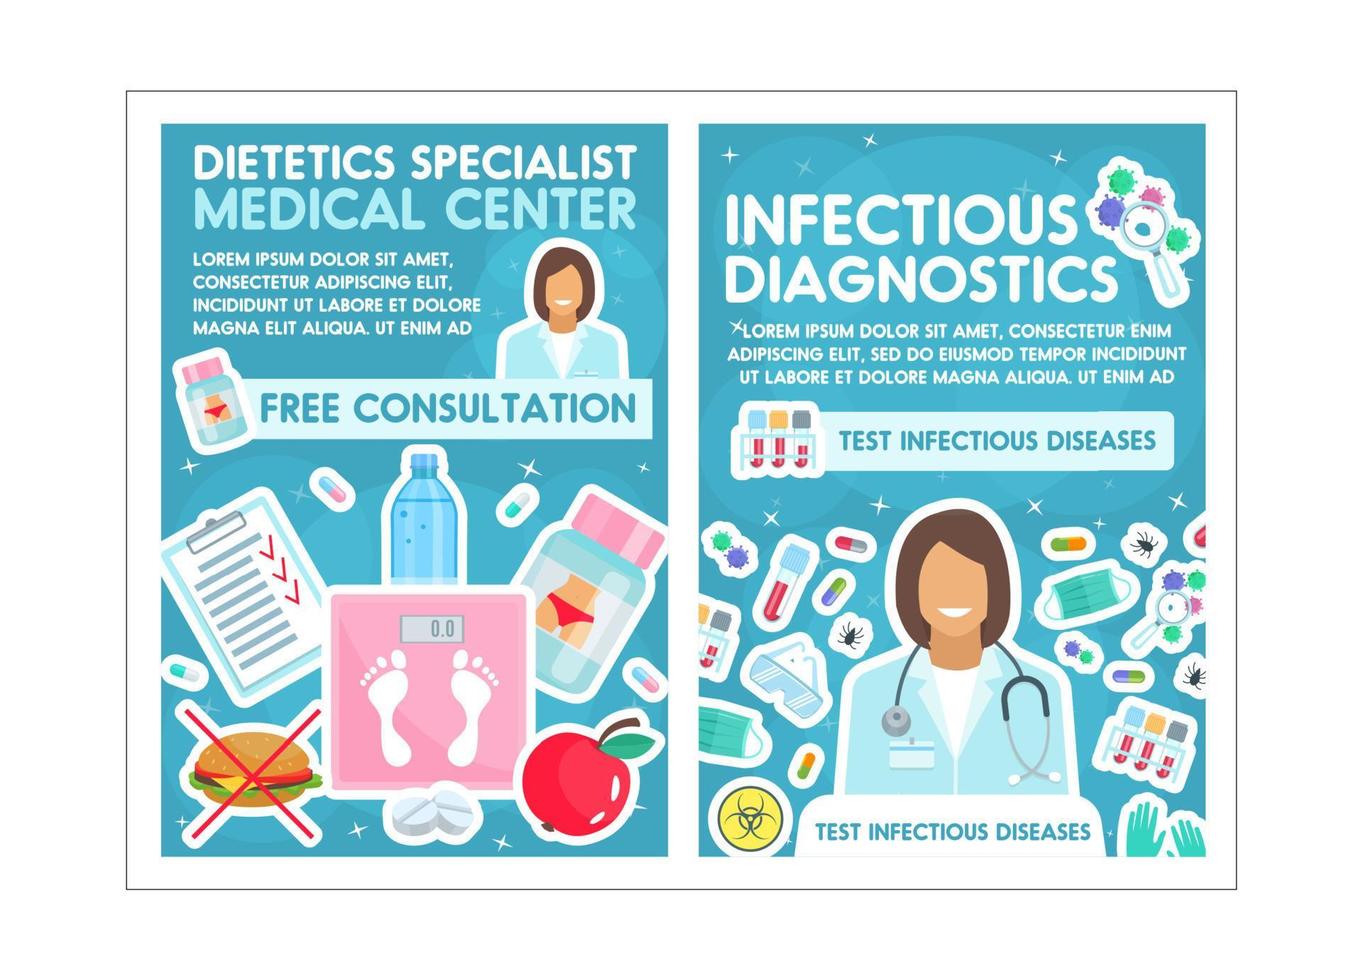 Dietetics and infectious disease clinic, vector